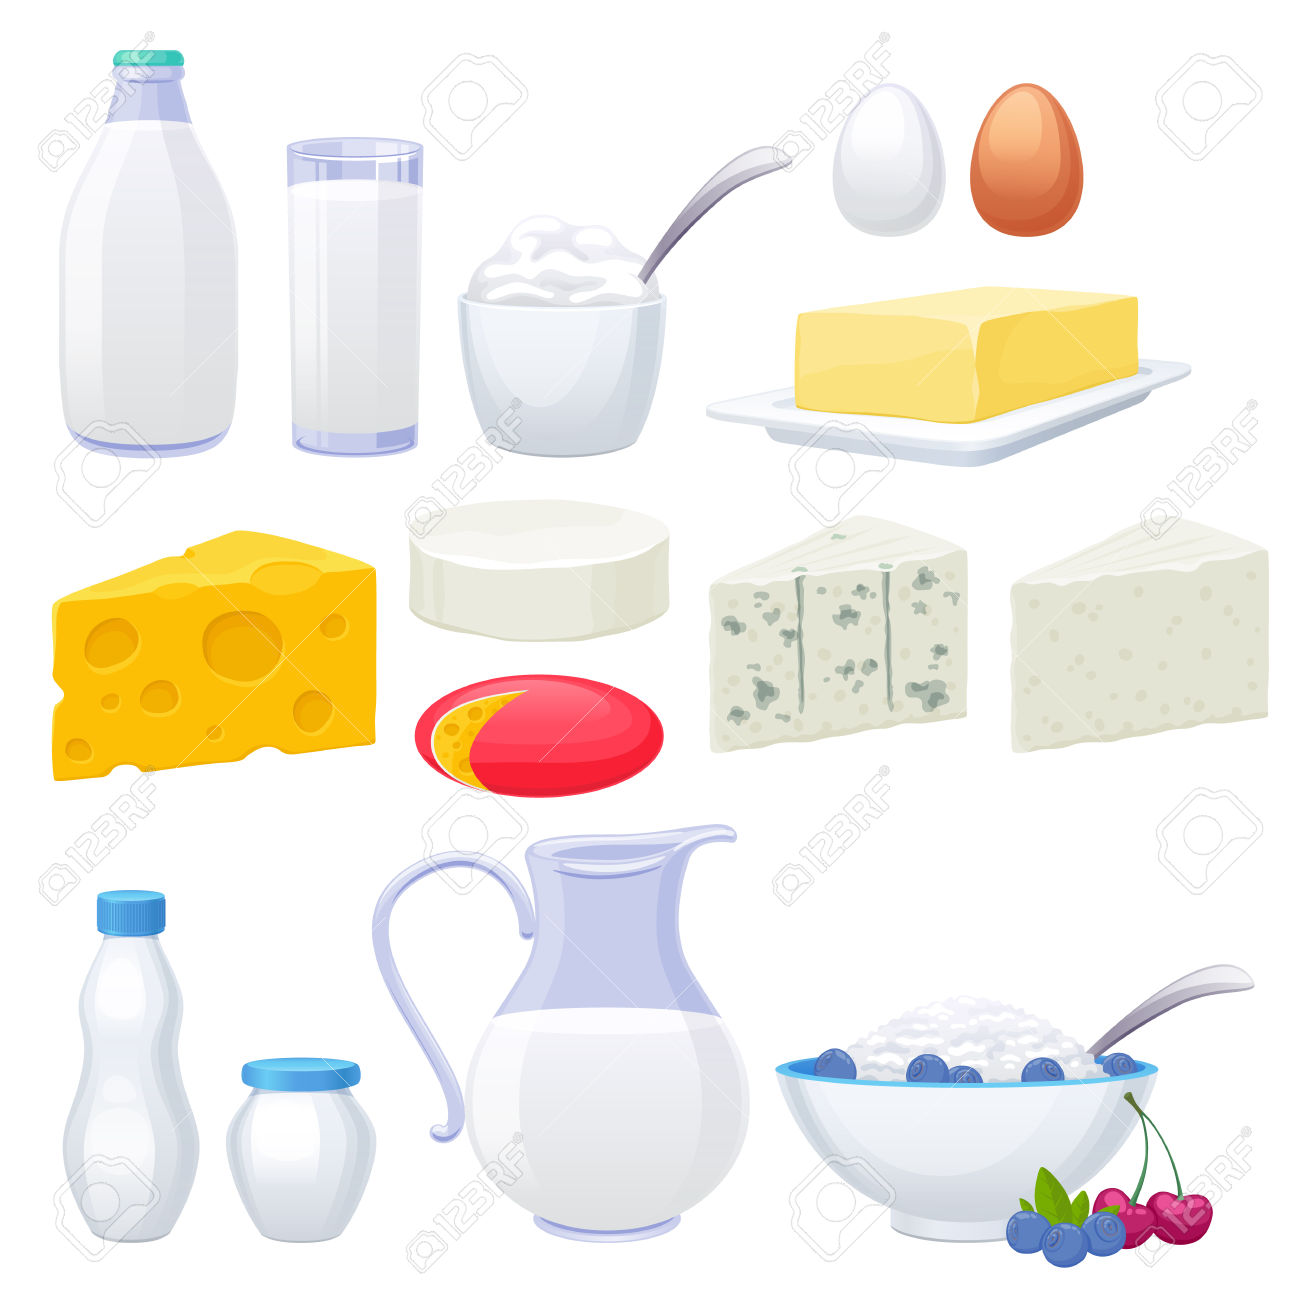 84,670 Milk Cliparts, Stock Vector And Royalty Free Milk Illustrations.